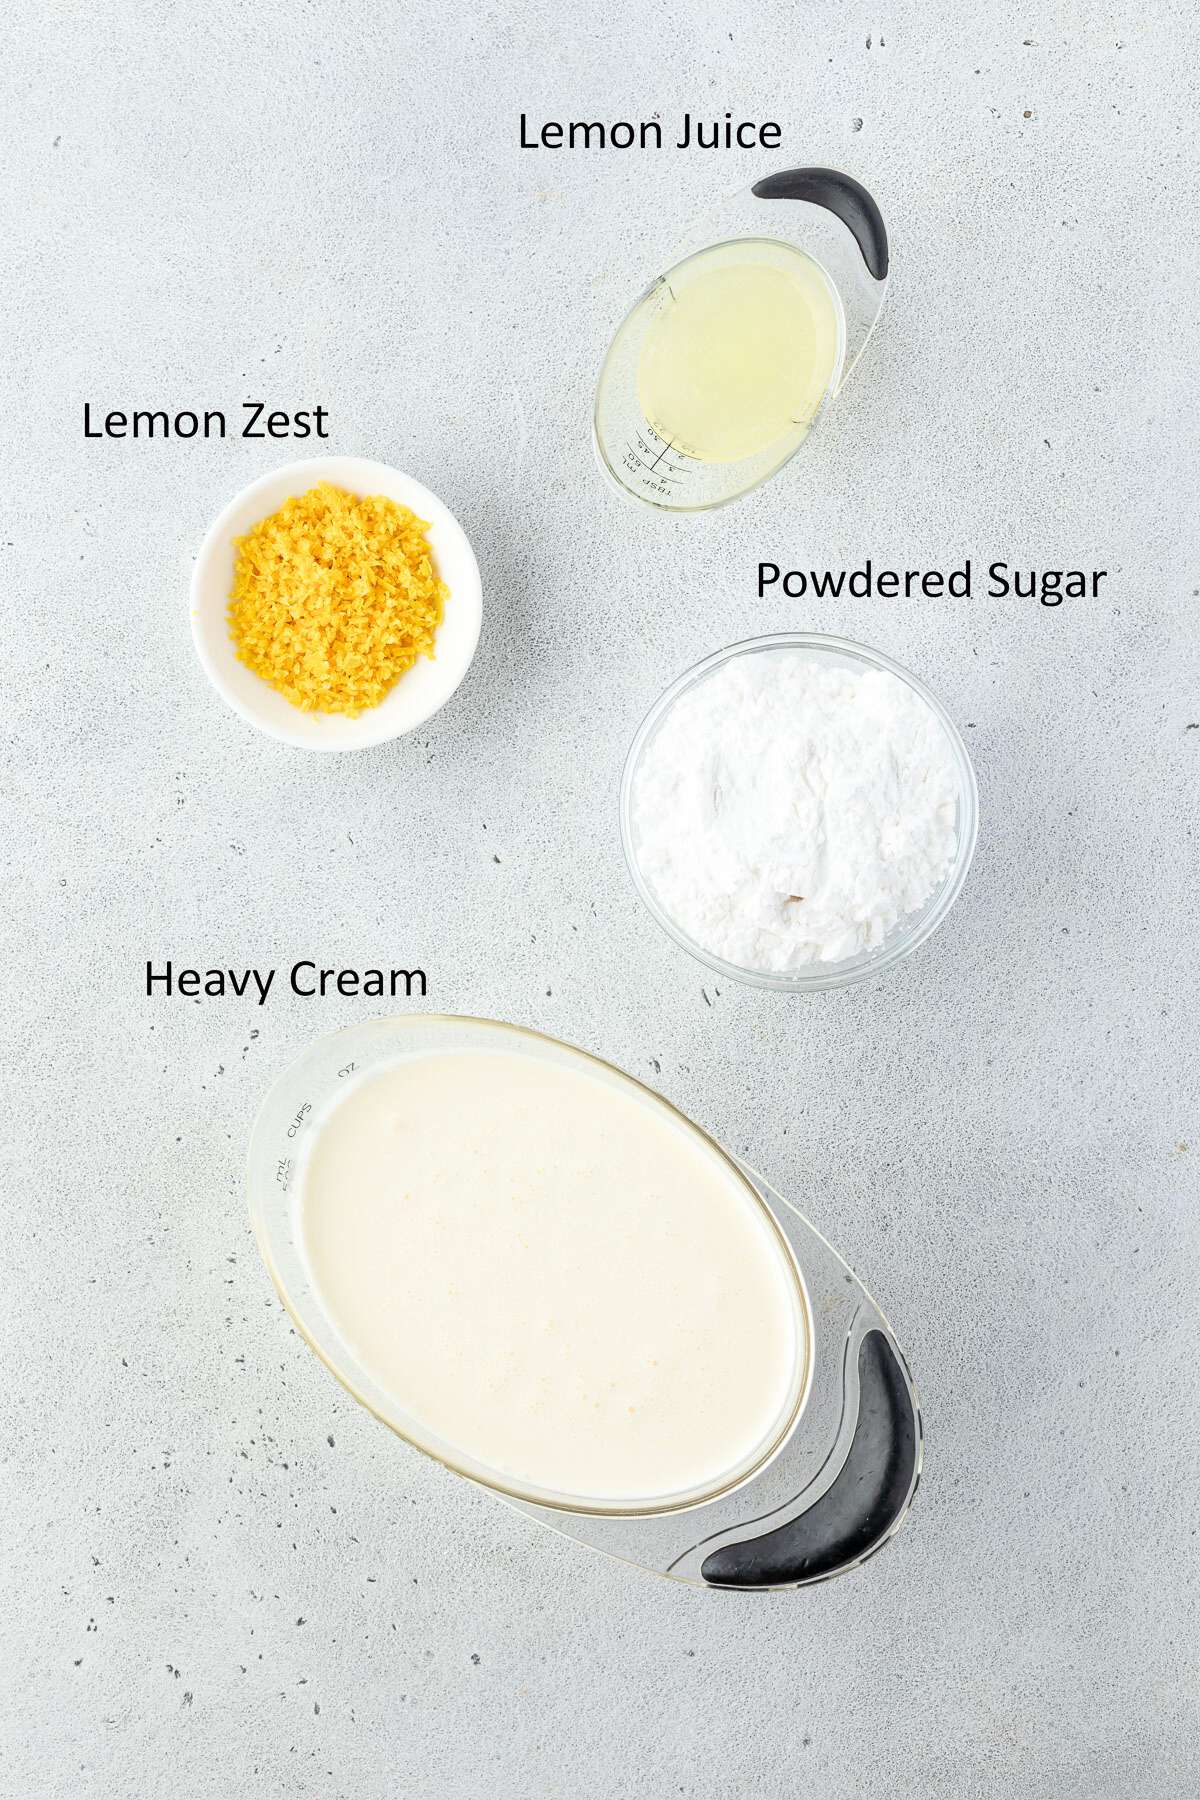 Heavy cream, powdered sugar, lemon zest, and lemon juice in separate containers.